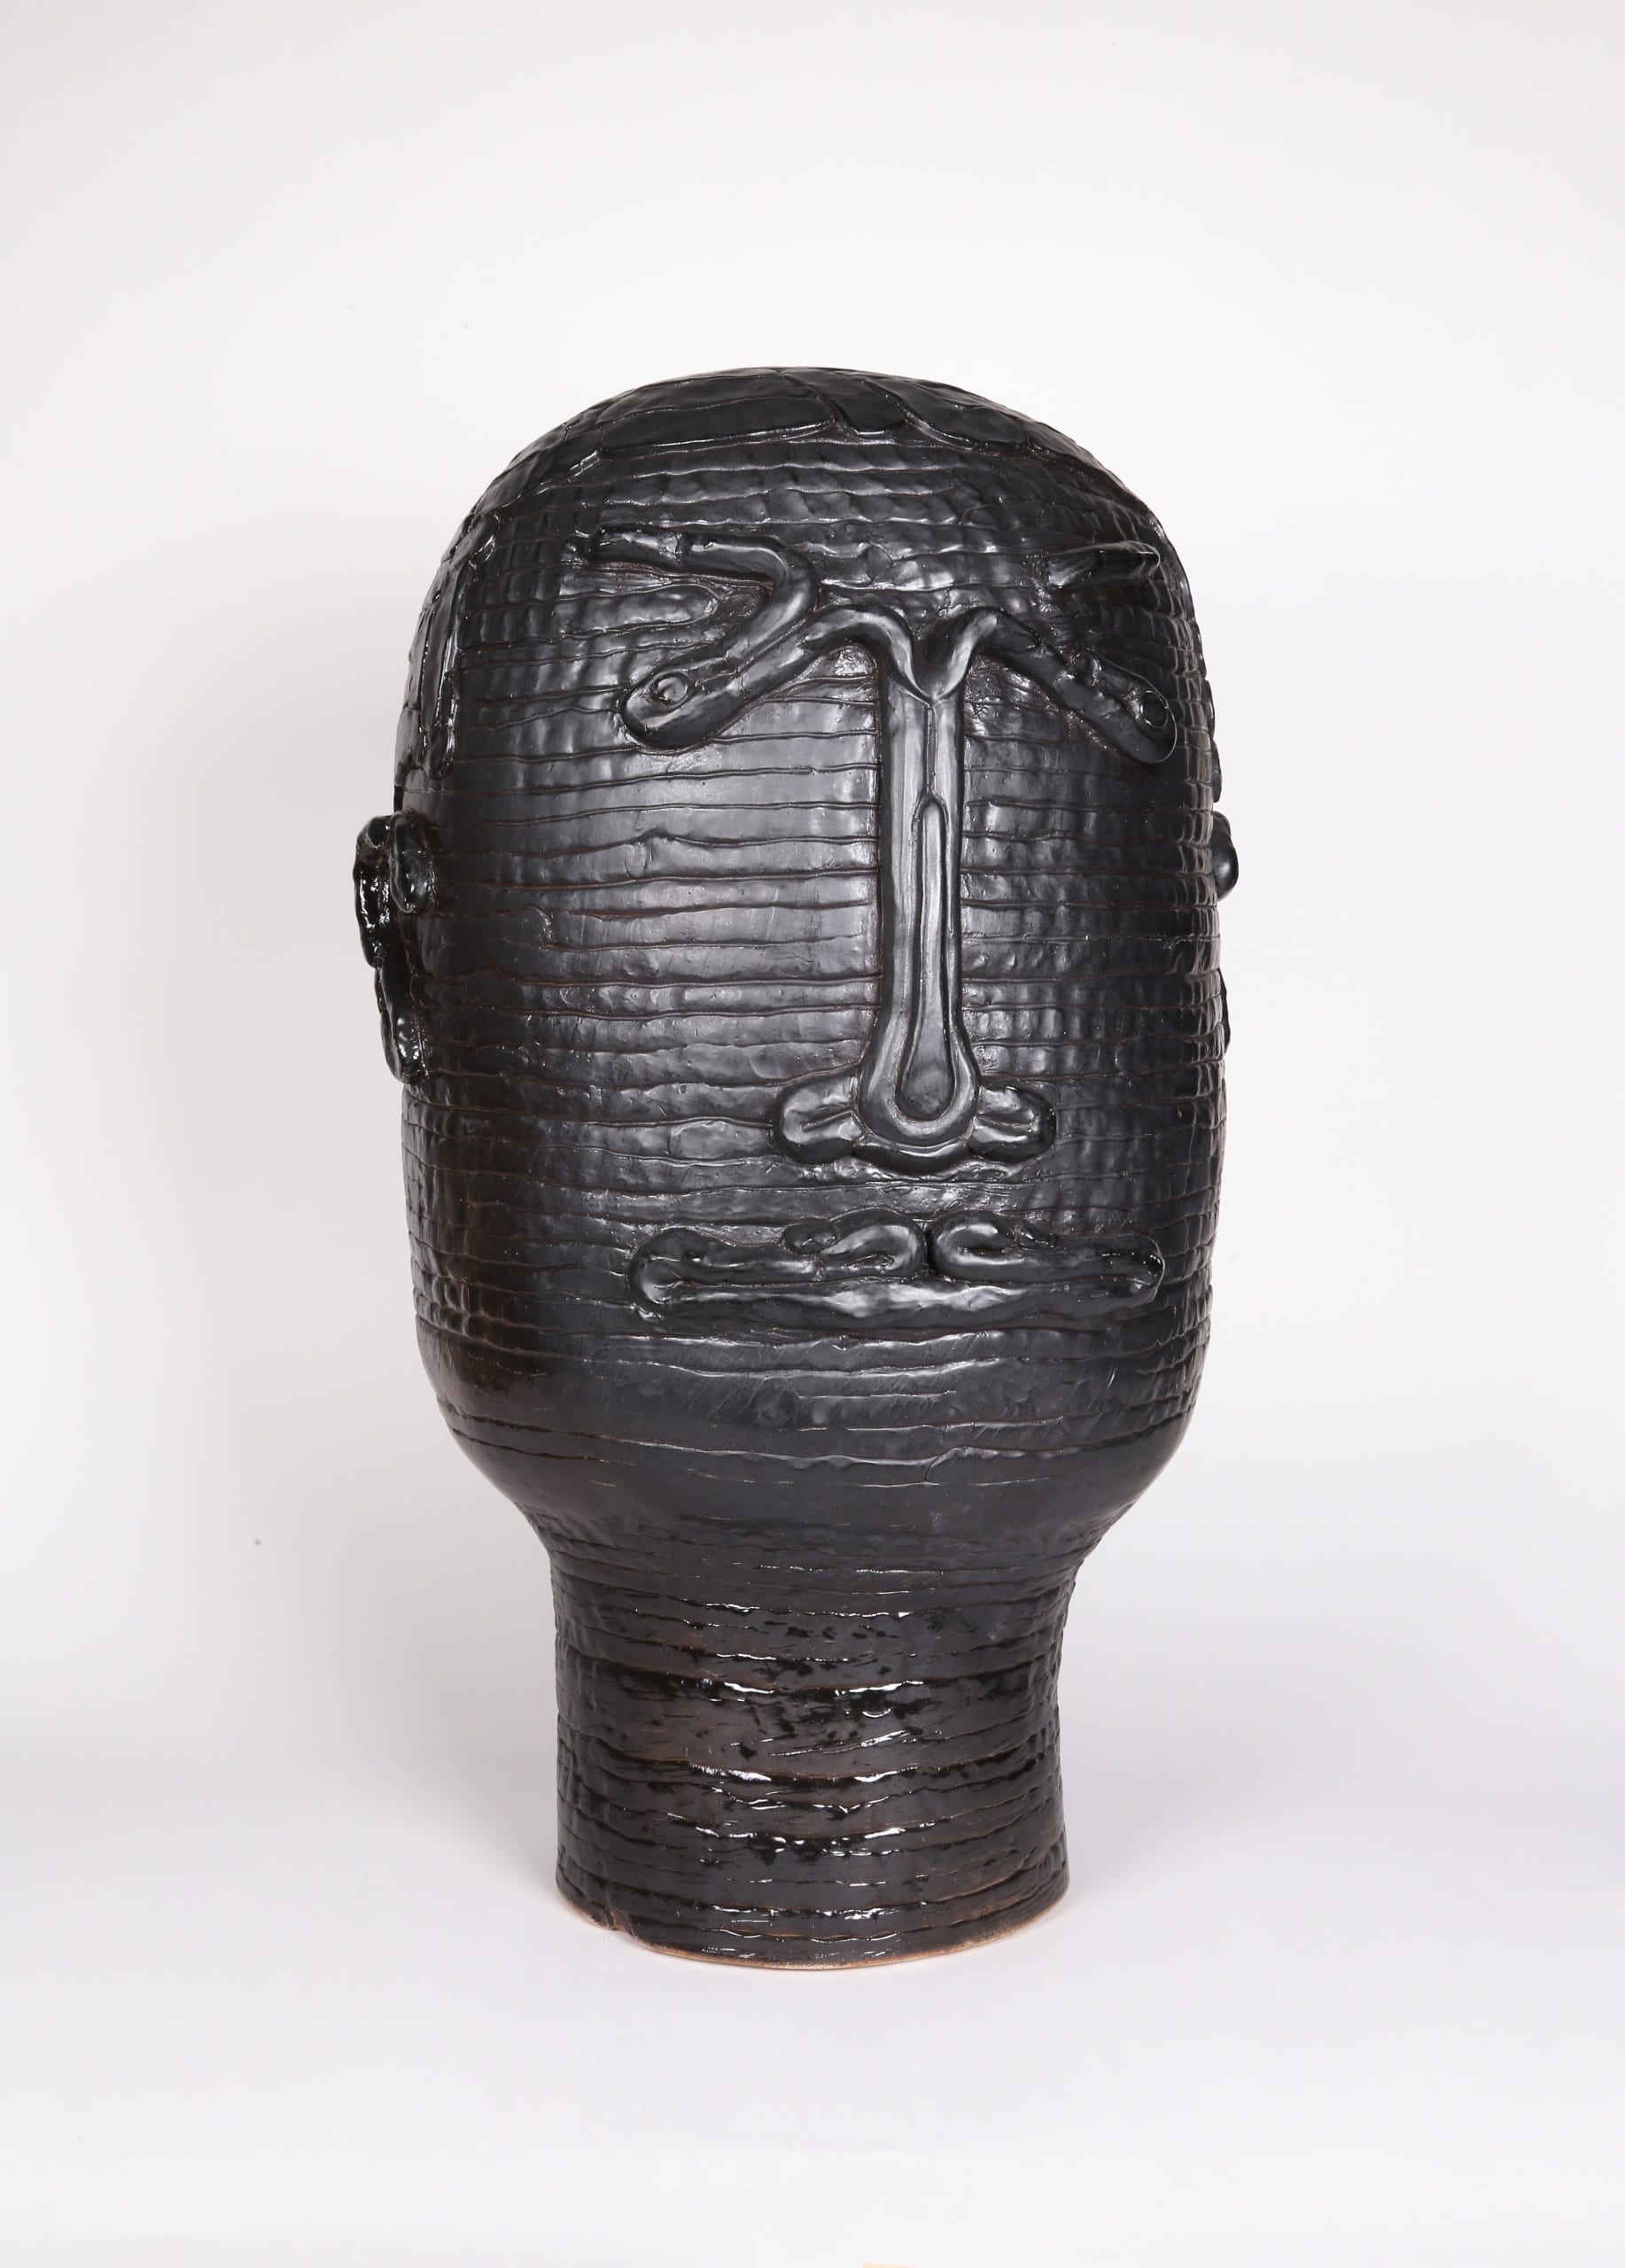 Color photograph with a frontal view of an abstract ceramic portrait head that appears to be made from a long coil of clay. The outline of two eyes, a nose, a mouth, and two ears are affixed to its surface. The object is a monochromatic black with a slight sheen to the glaze.